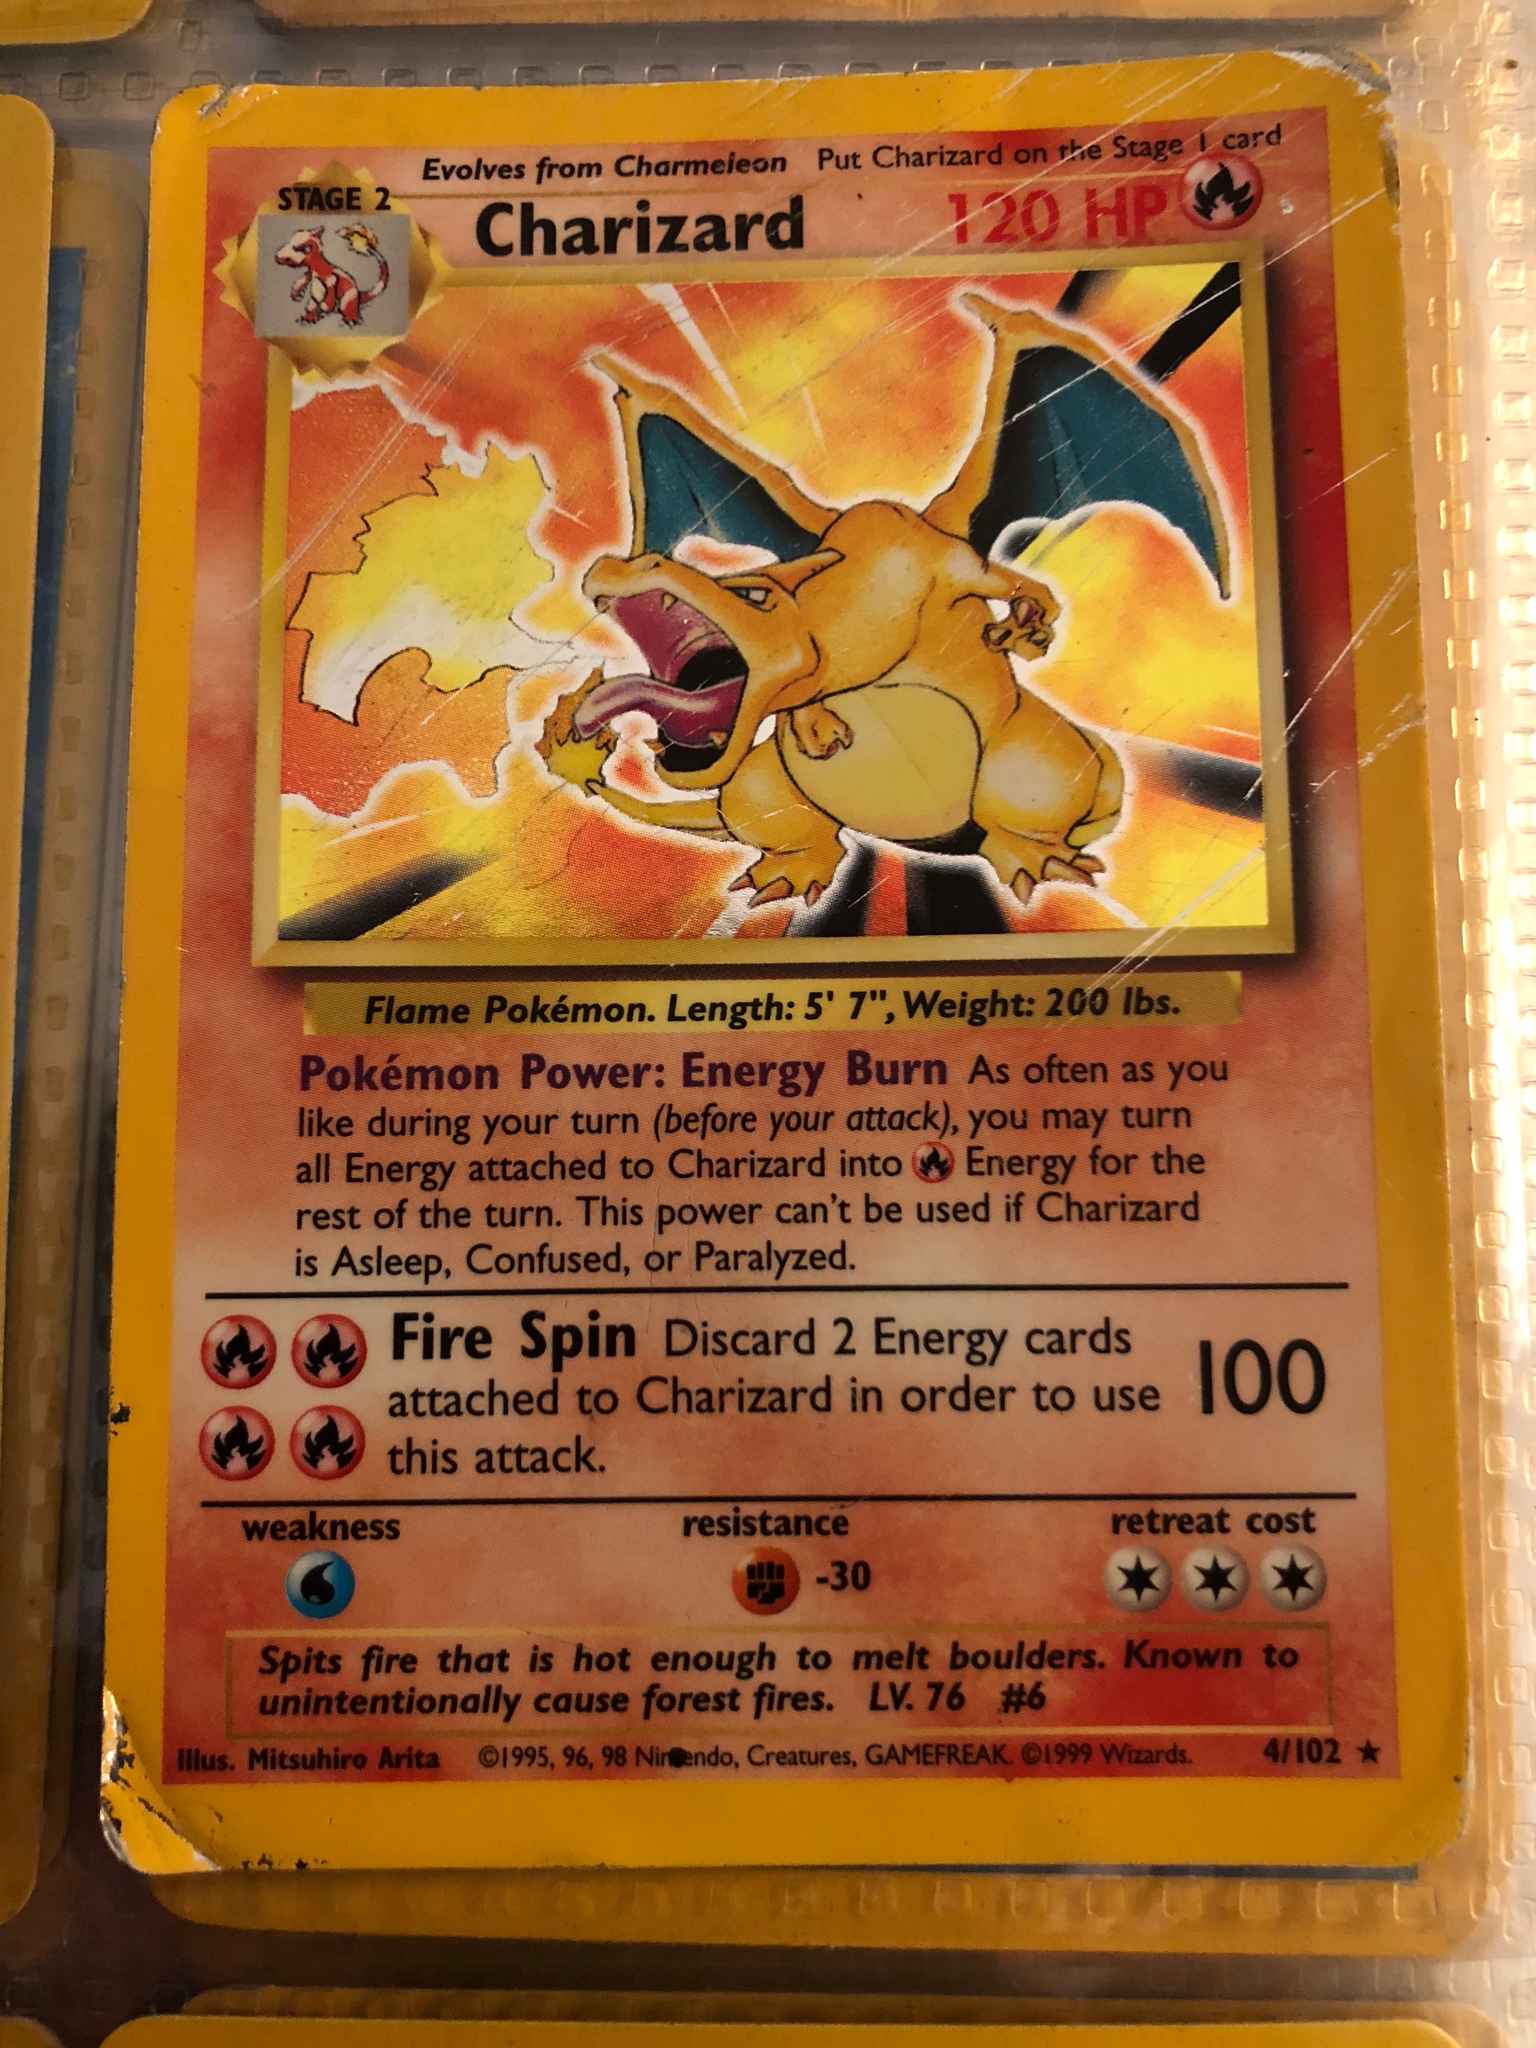 Collectible Charizard Pokemon Card 4 102 Holo Holofoil Hp Charizard Base Set Pokemon Online Gaming Store For Cards Miniatures Singles Packs Booster Boxes